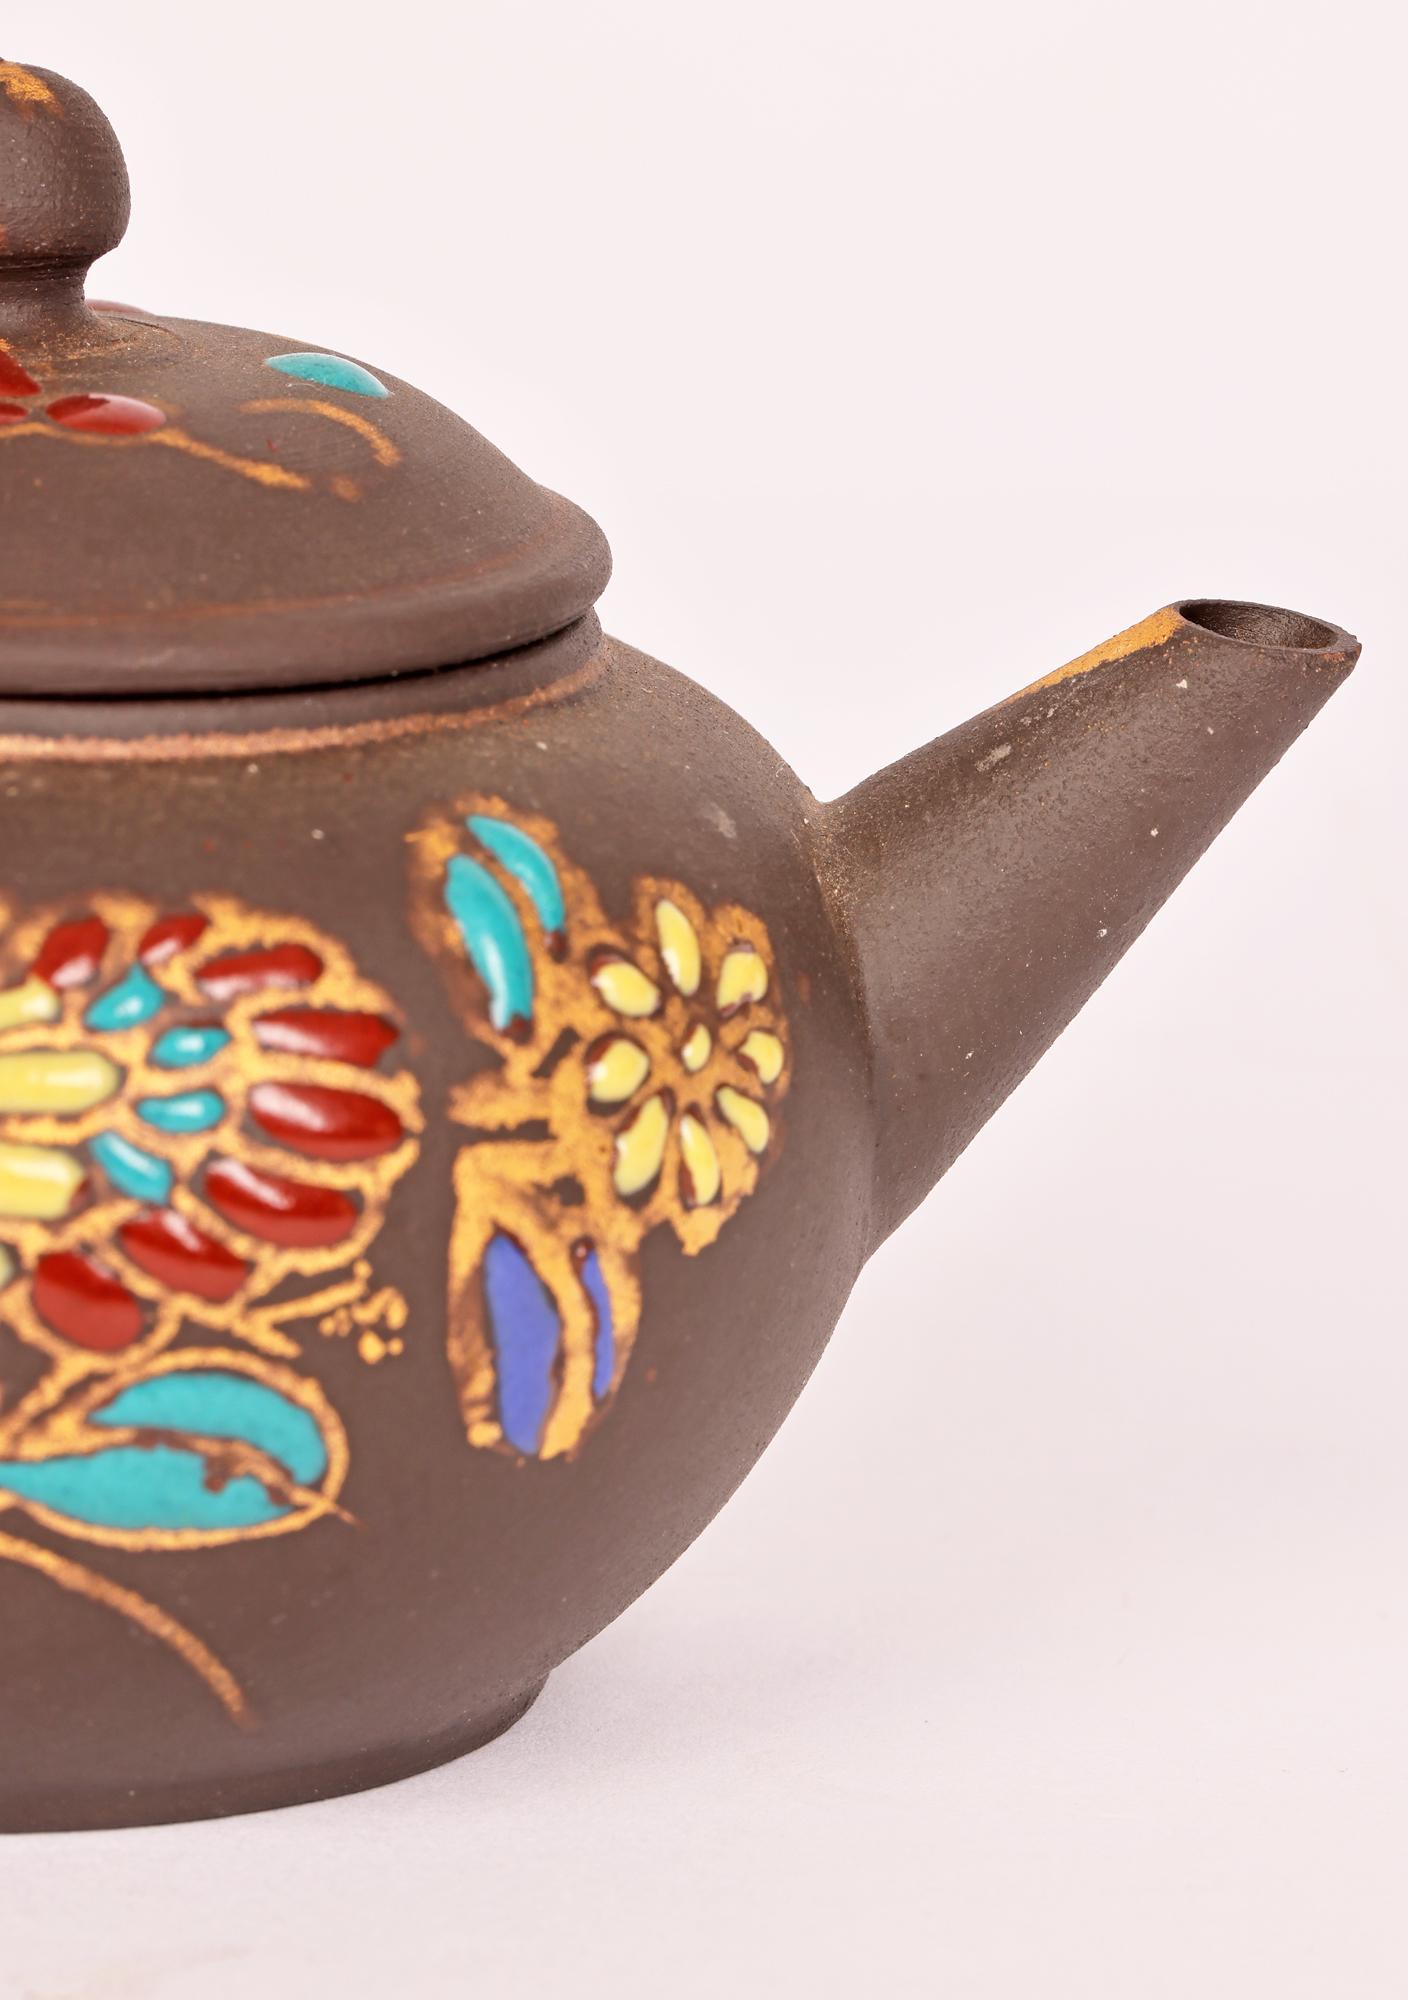 A fine vintage Chinese miniature teapot hand applied with enamel floral designs dating from the mid 20th century. The lightly potted teapot is of squat rounded shape with a loop handle and short pouring spout and with a slightly domed fitted cover.